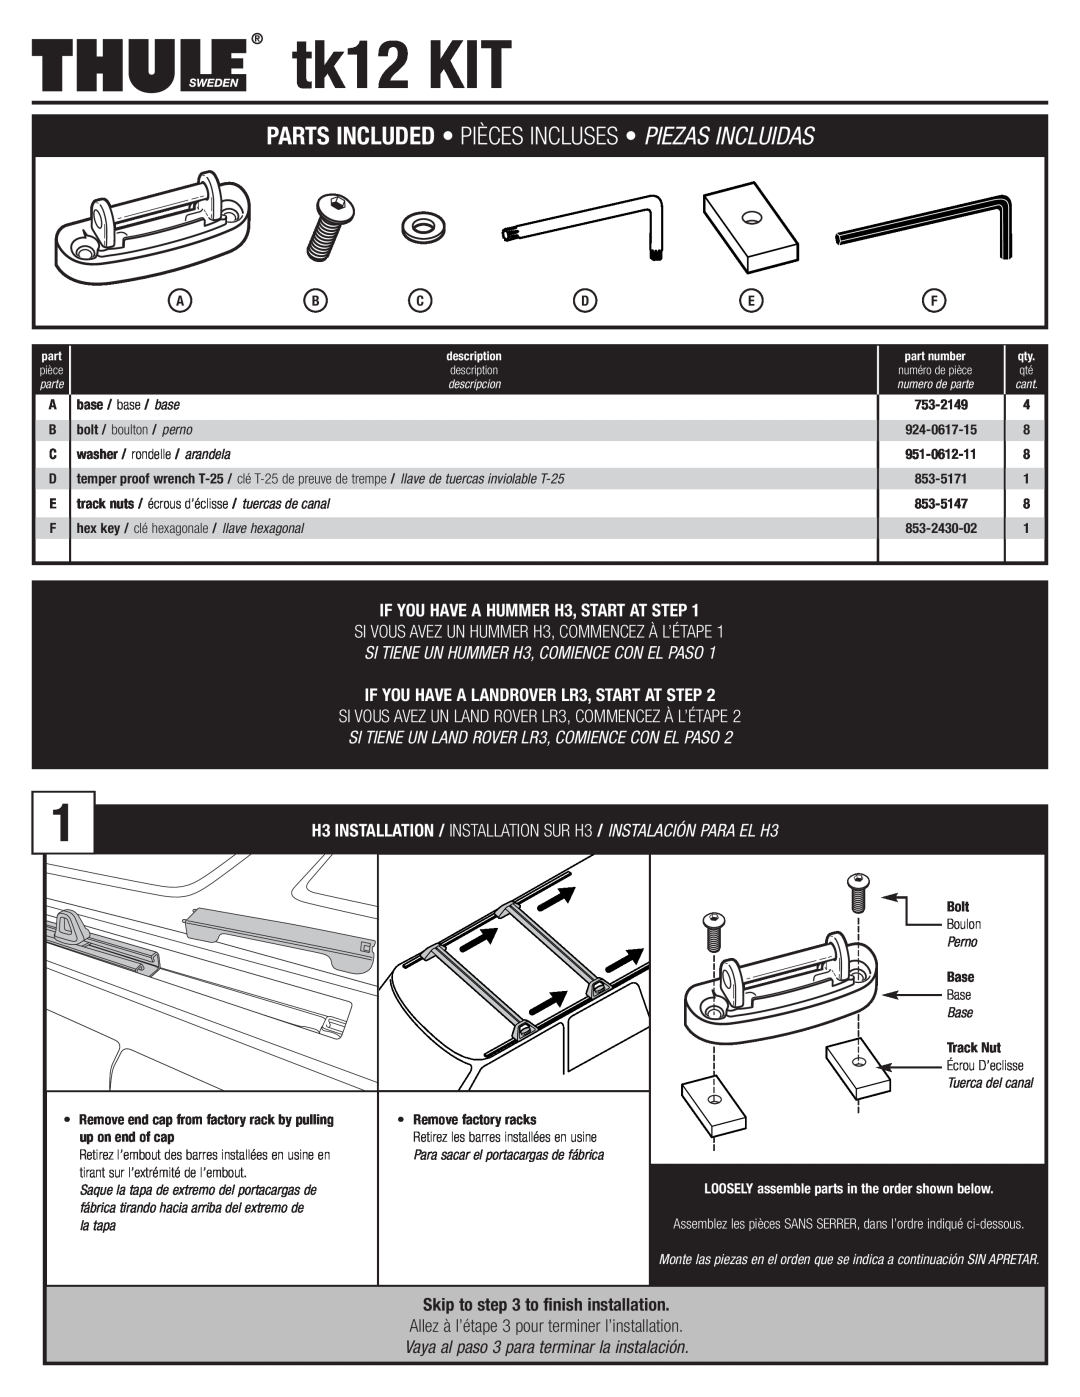 Thule TK12 manual IF YOU HAVE A HUMMER H3, START AT STEP, IF YOU HAVE A LANDROVER LR3, START AT STEP, tk12 KIT 